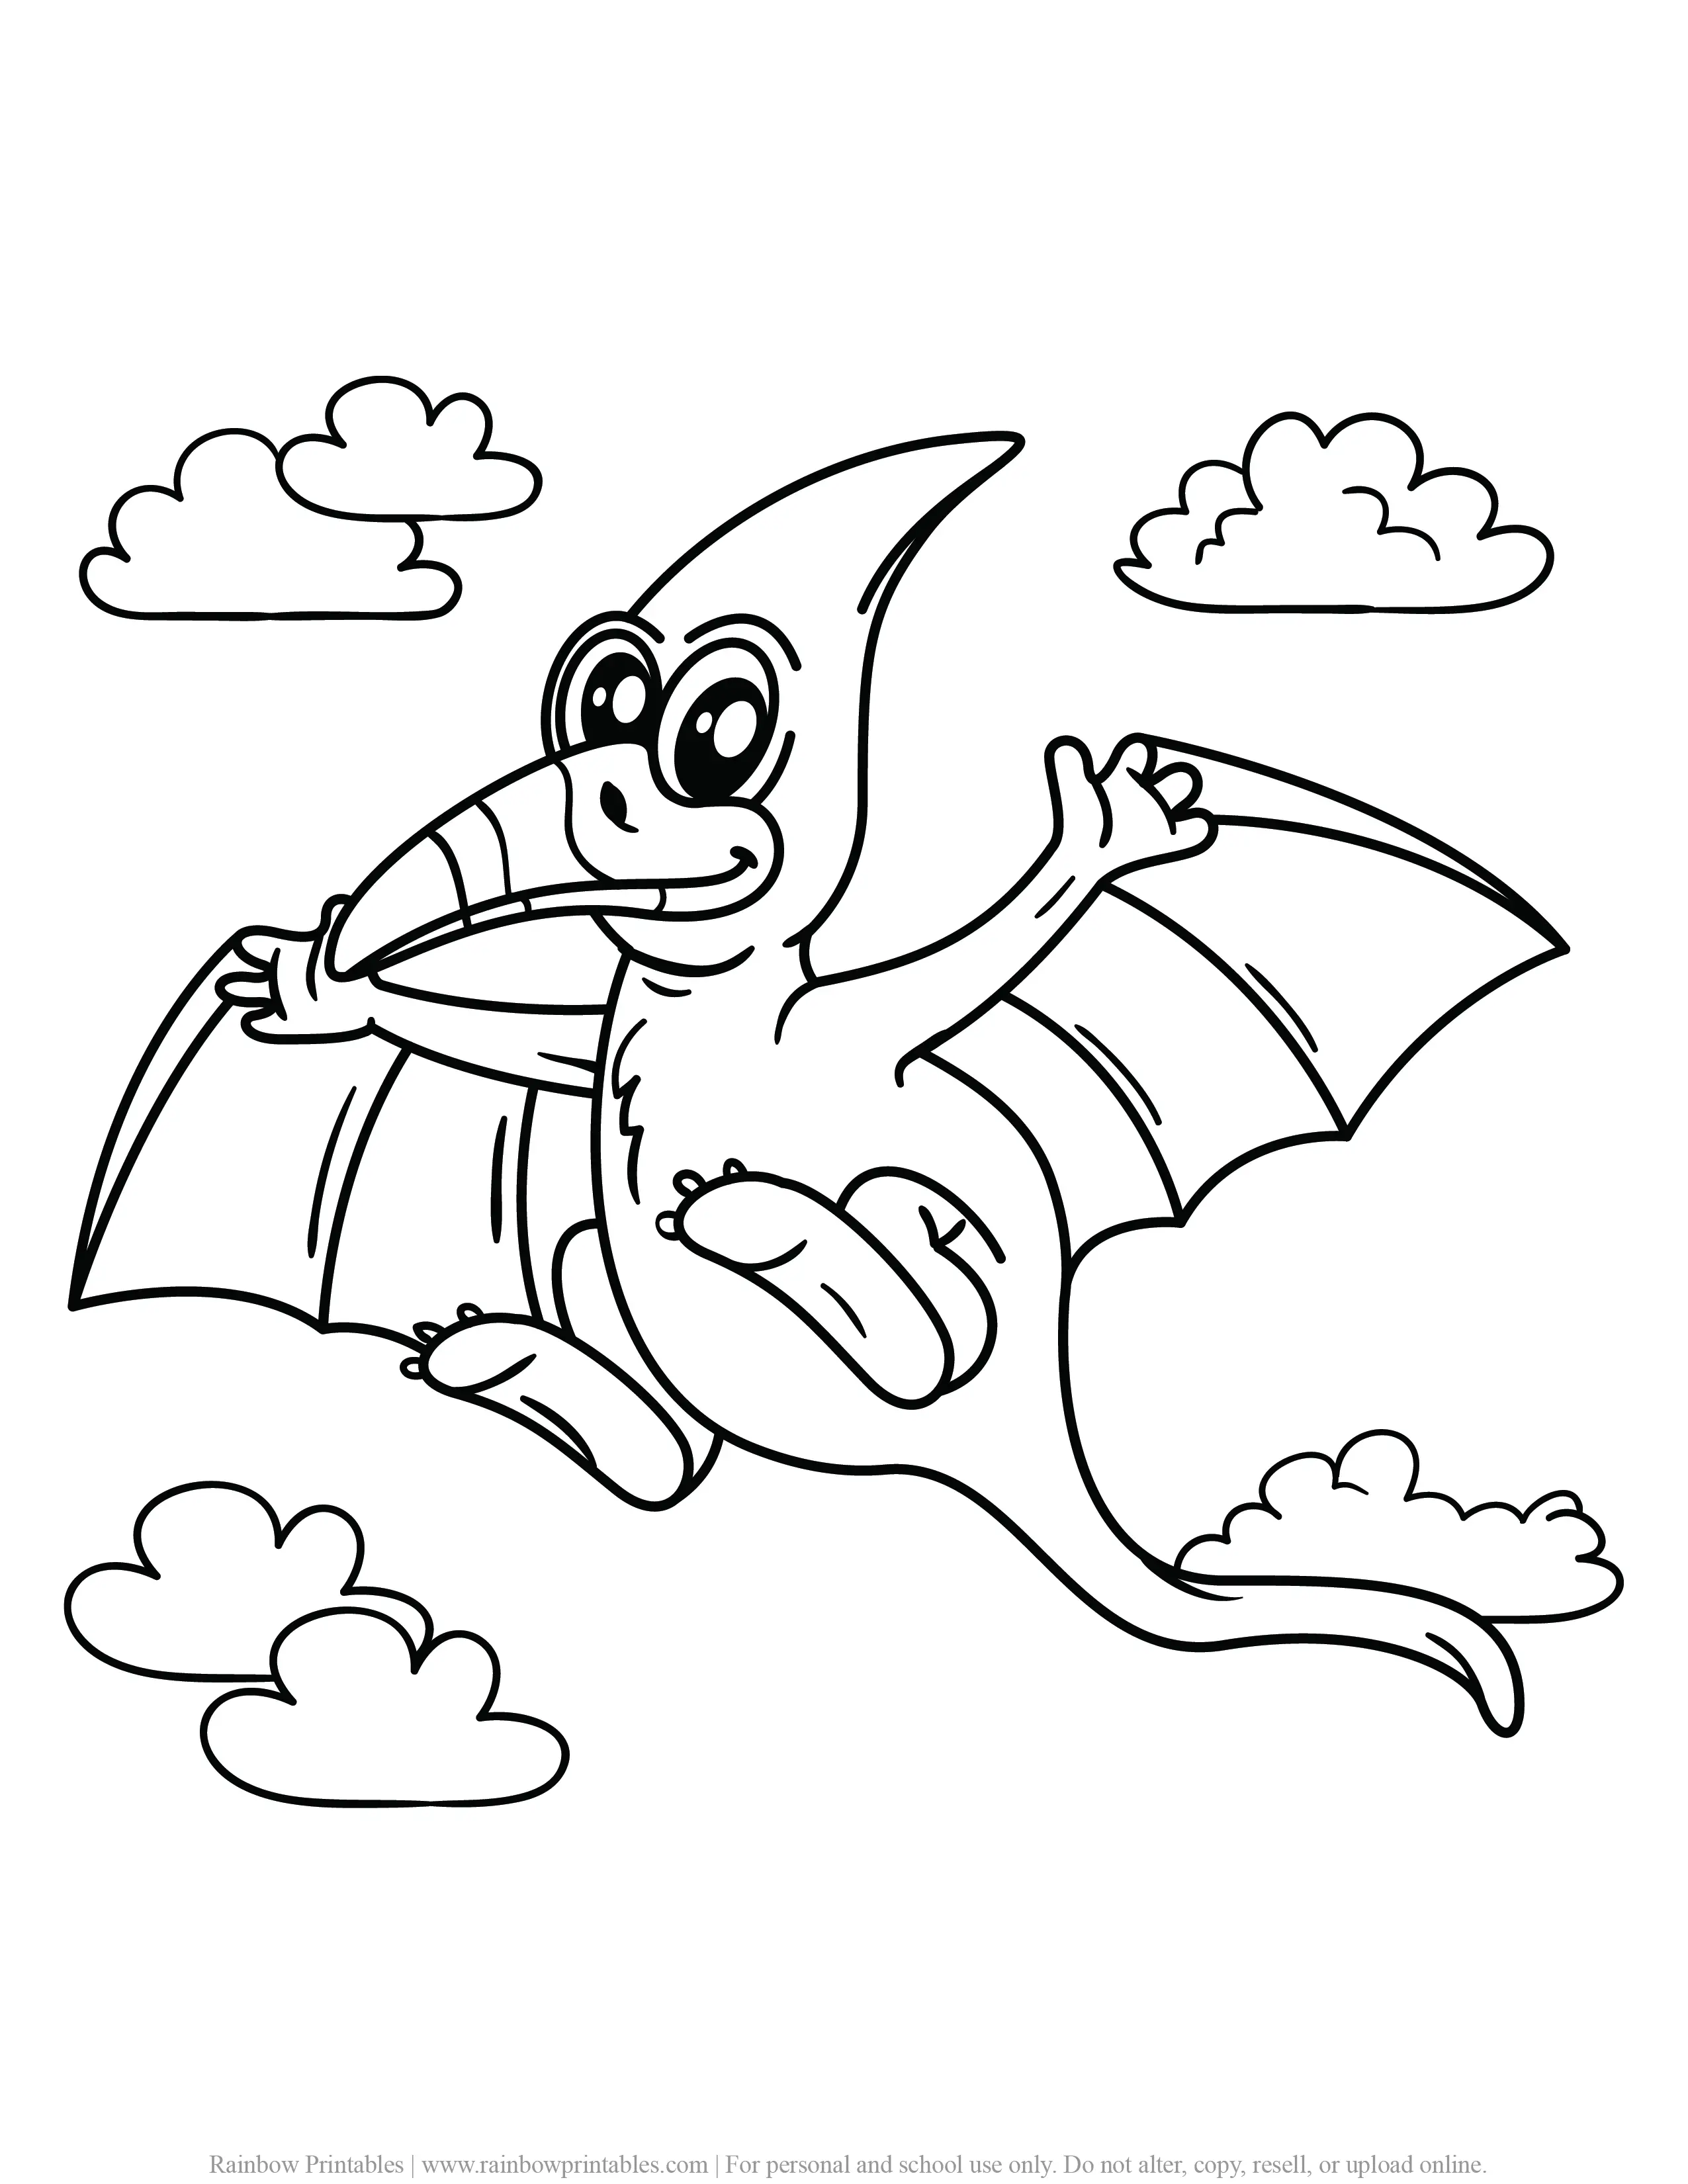 FREE DINOSAUR COLORING PAGES ACTIVITY FOR KIDS AND BOYS DINO DRAGON PRINTABLE-07